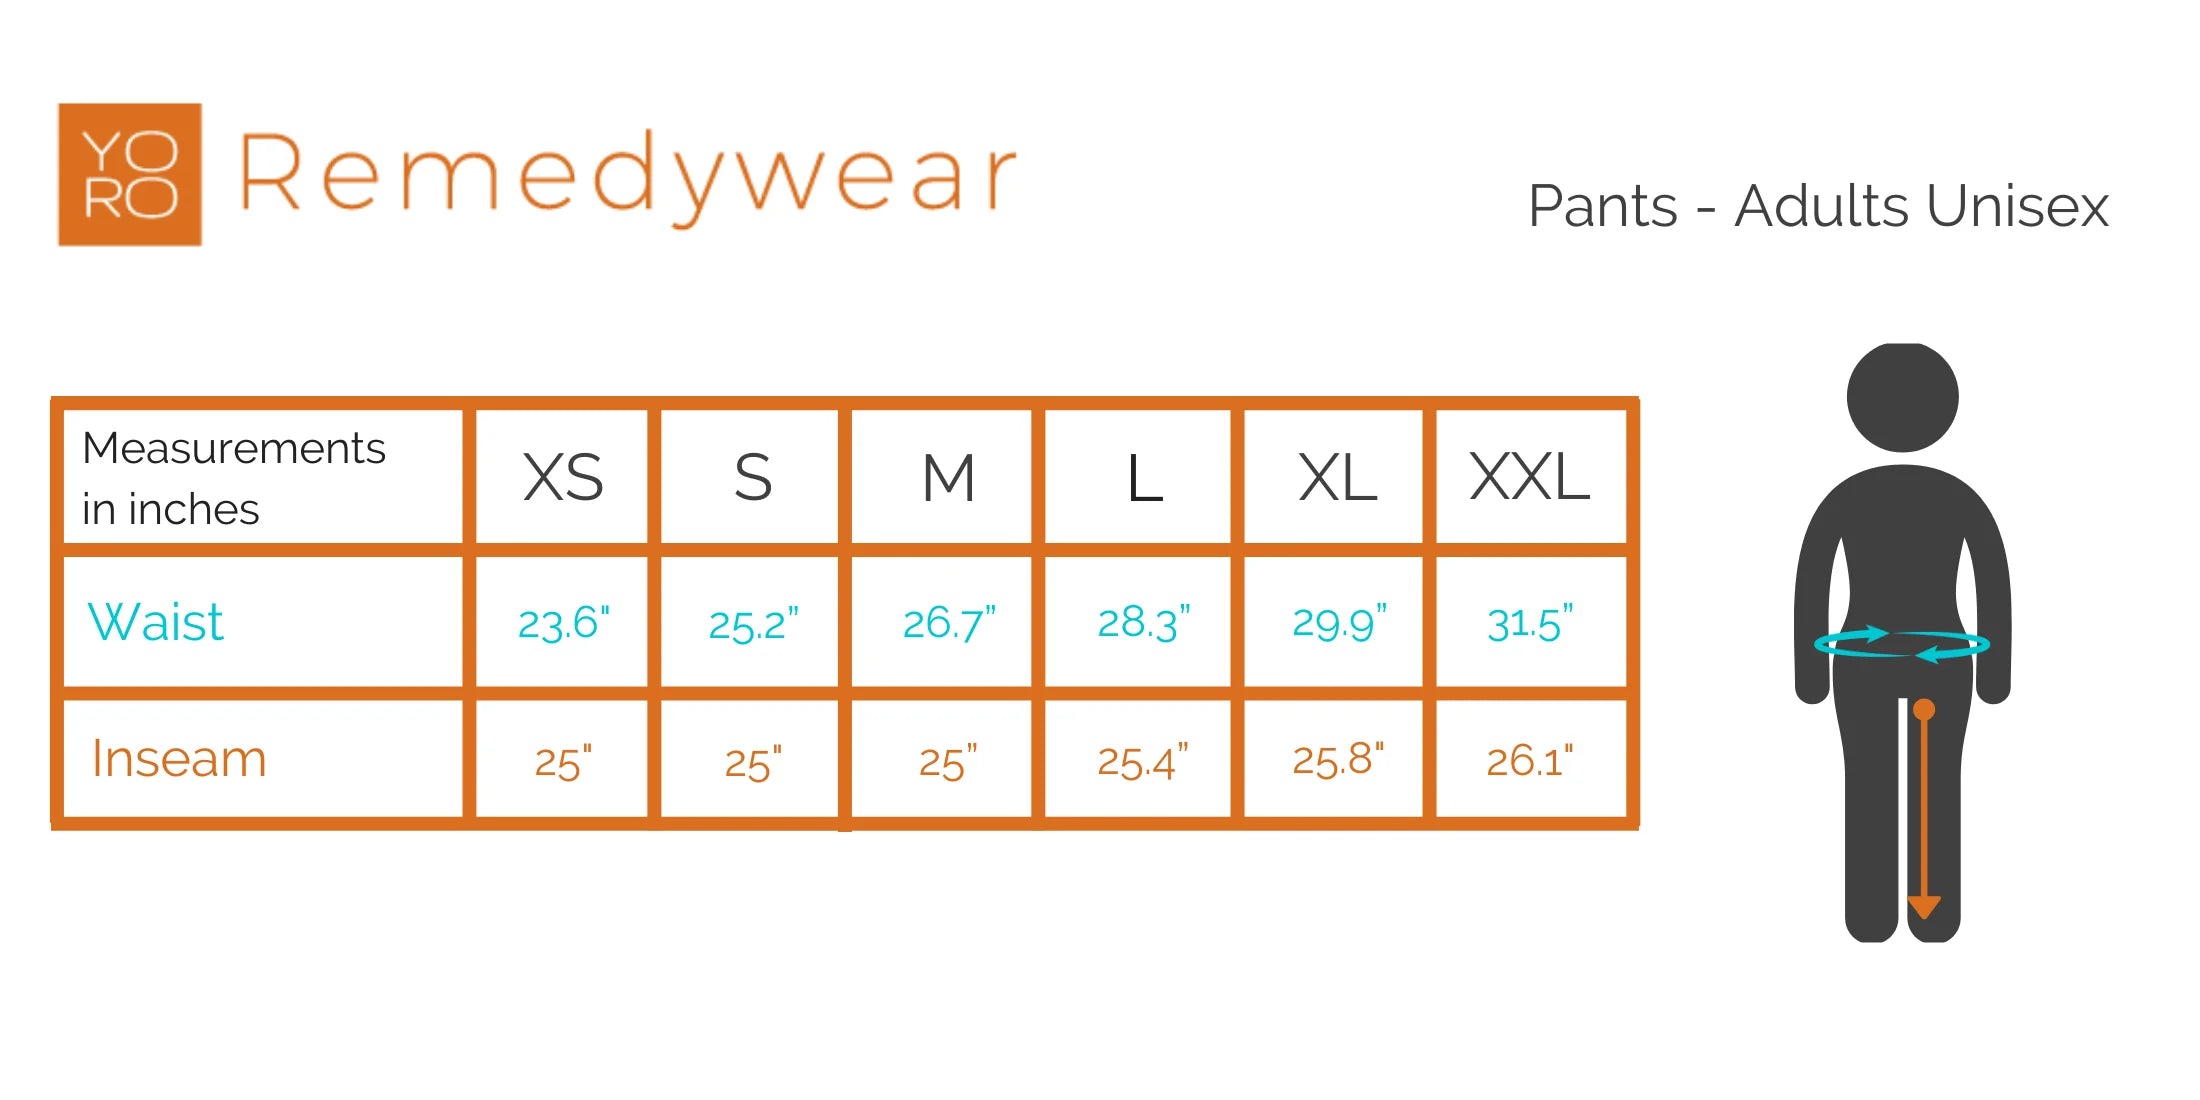 Remedywear Adult Pants - Sizing Guide